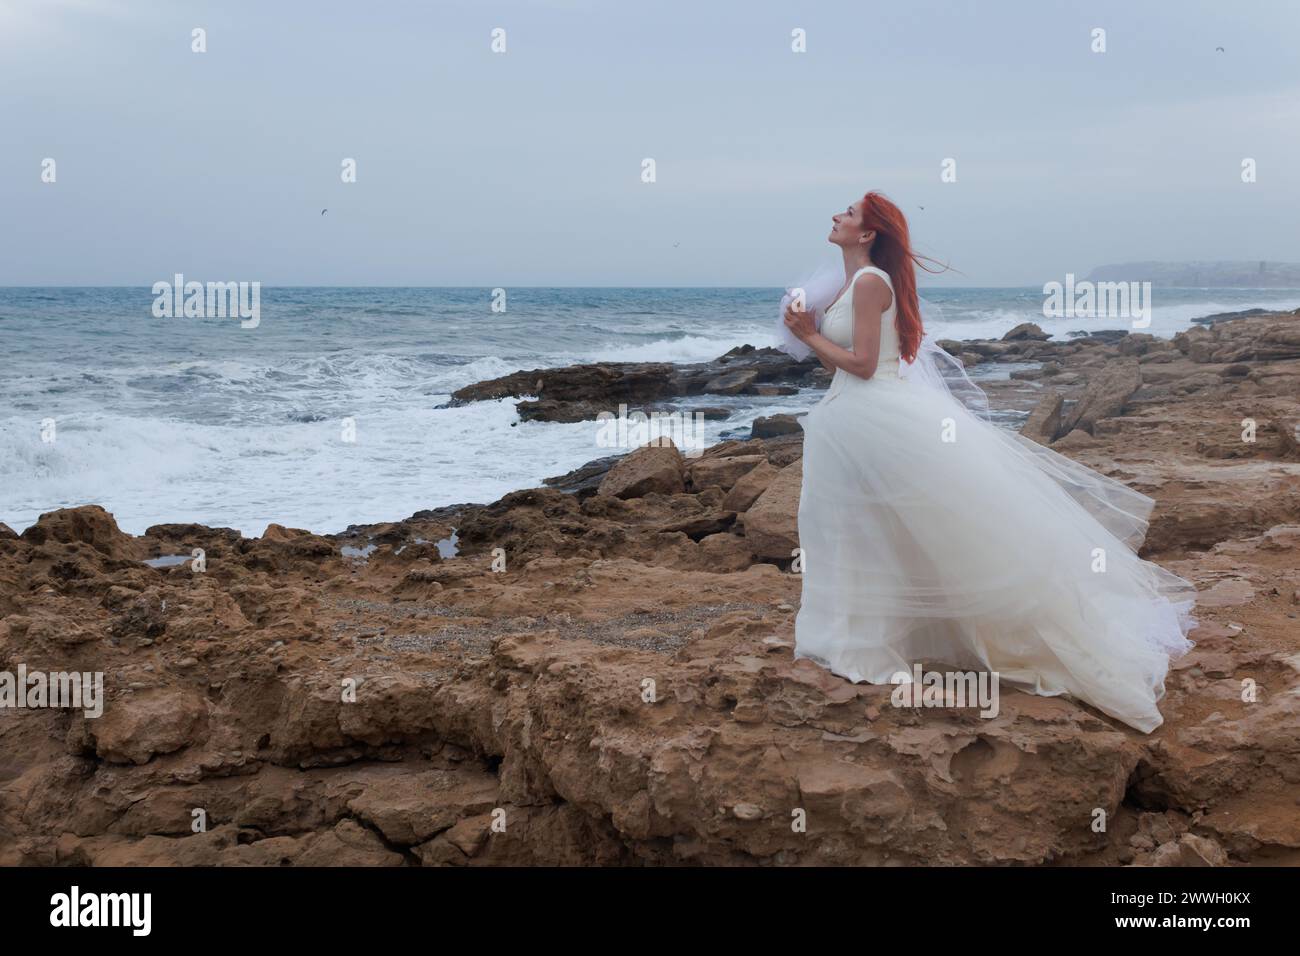 Lonely woman in wedding dress praying to gods a groom for wedding on windy day on Mediterranean sea coast, Alicante, Spain Stock Photo